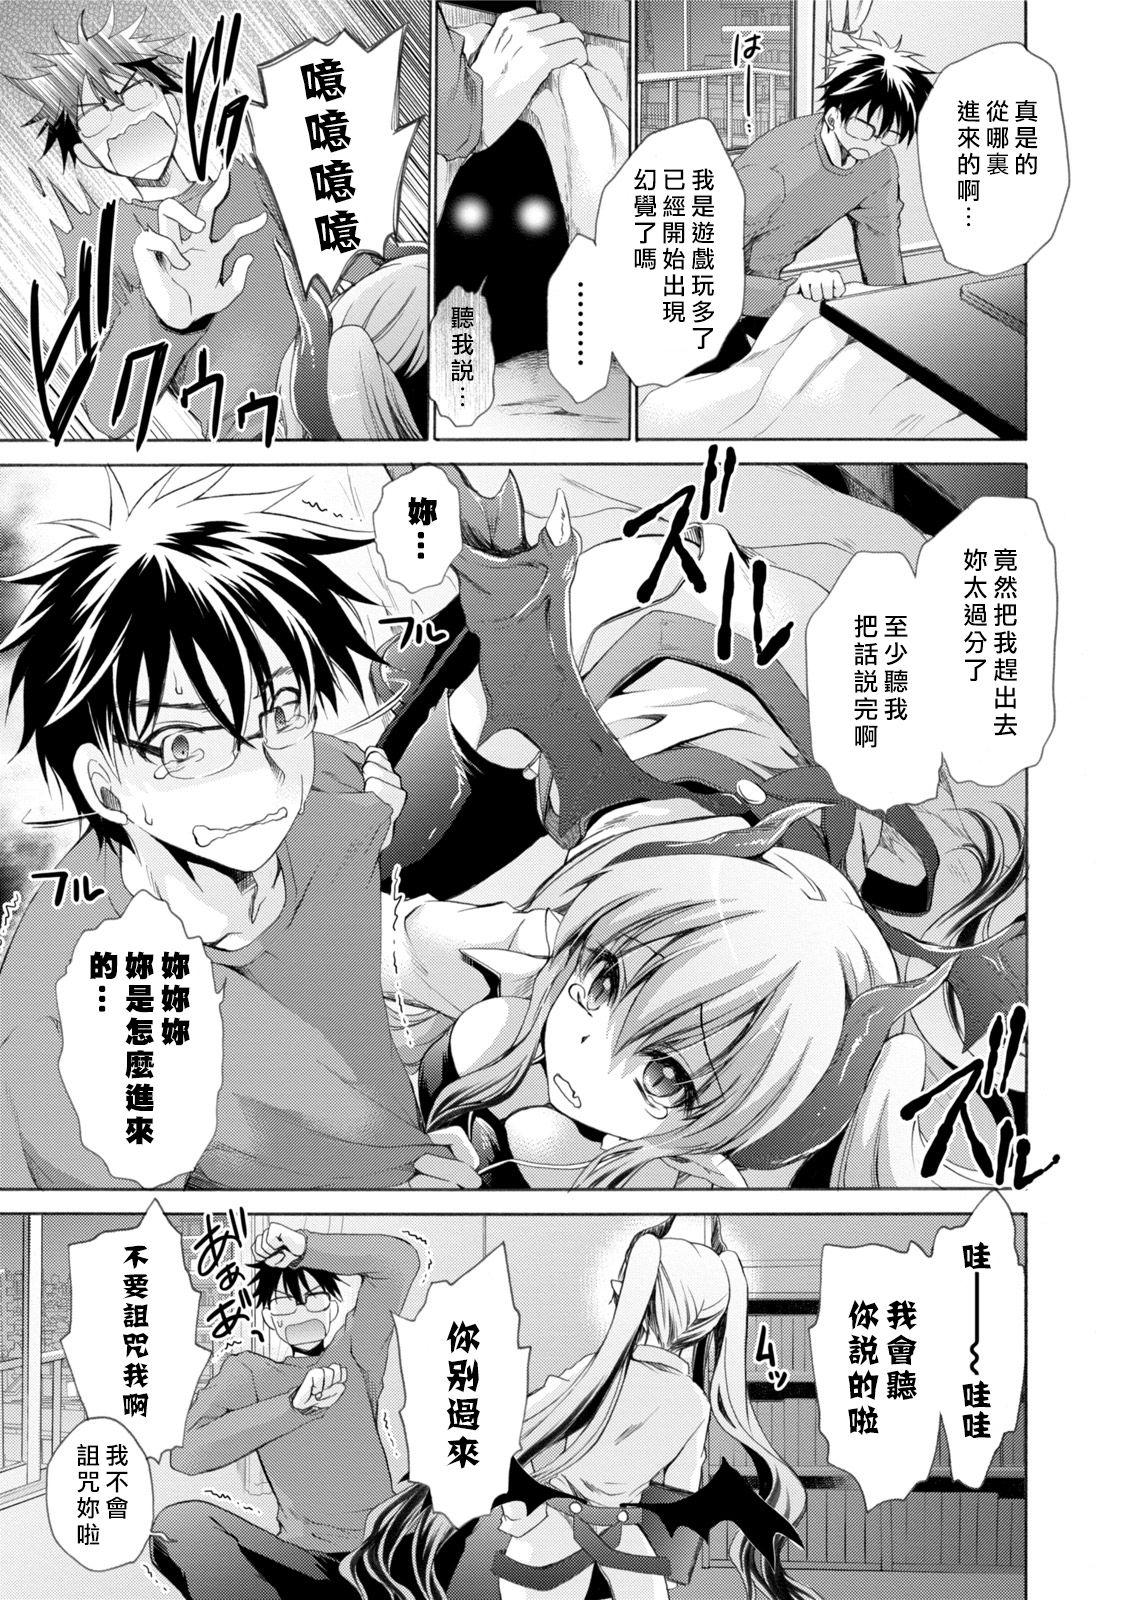 Blow Job Ore to Kanojo to Owaru Sekai - World's end LoveStory 1 Clothed Sex - Page 9